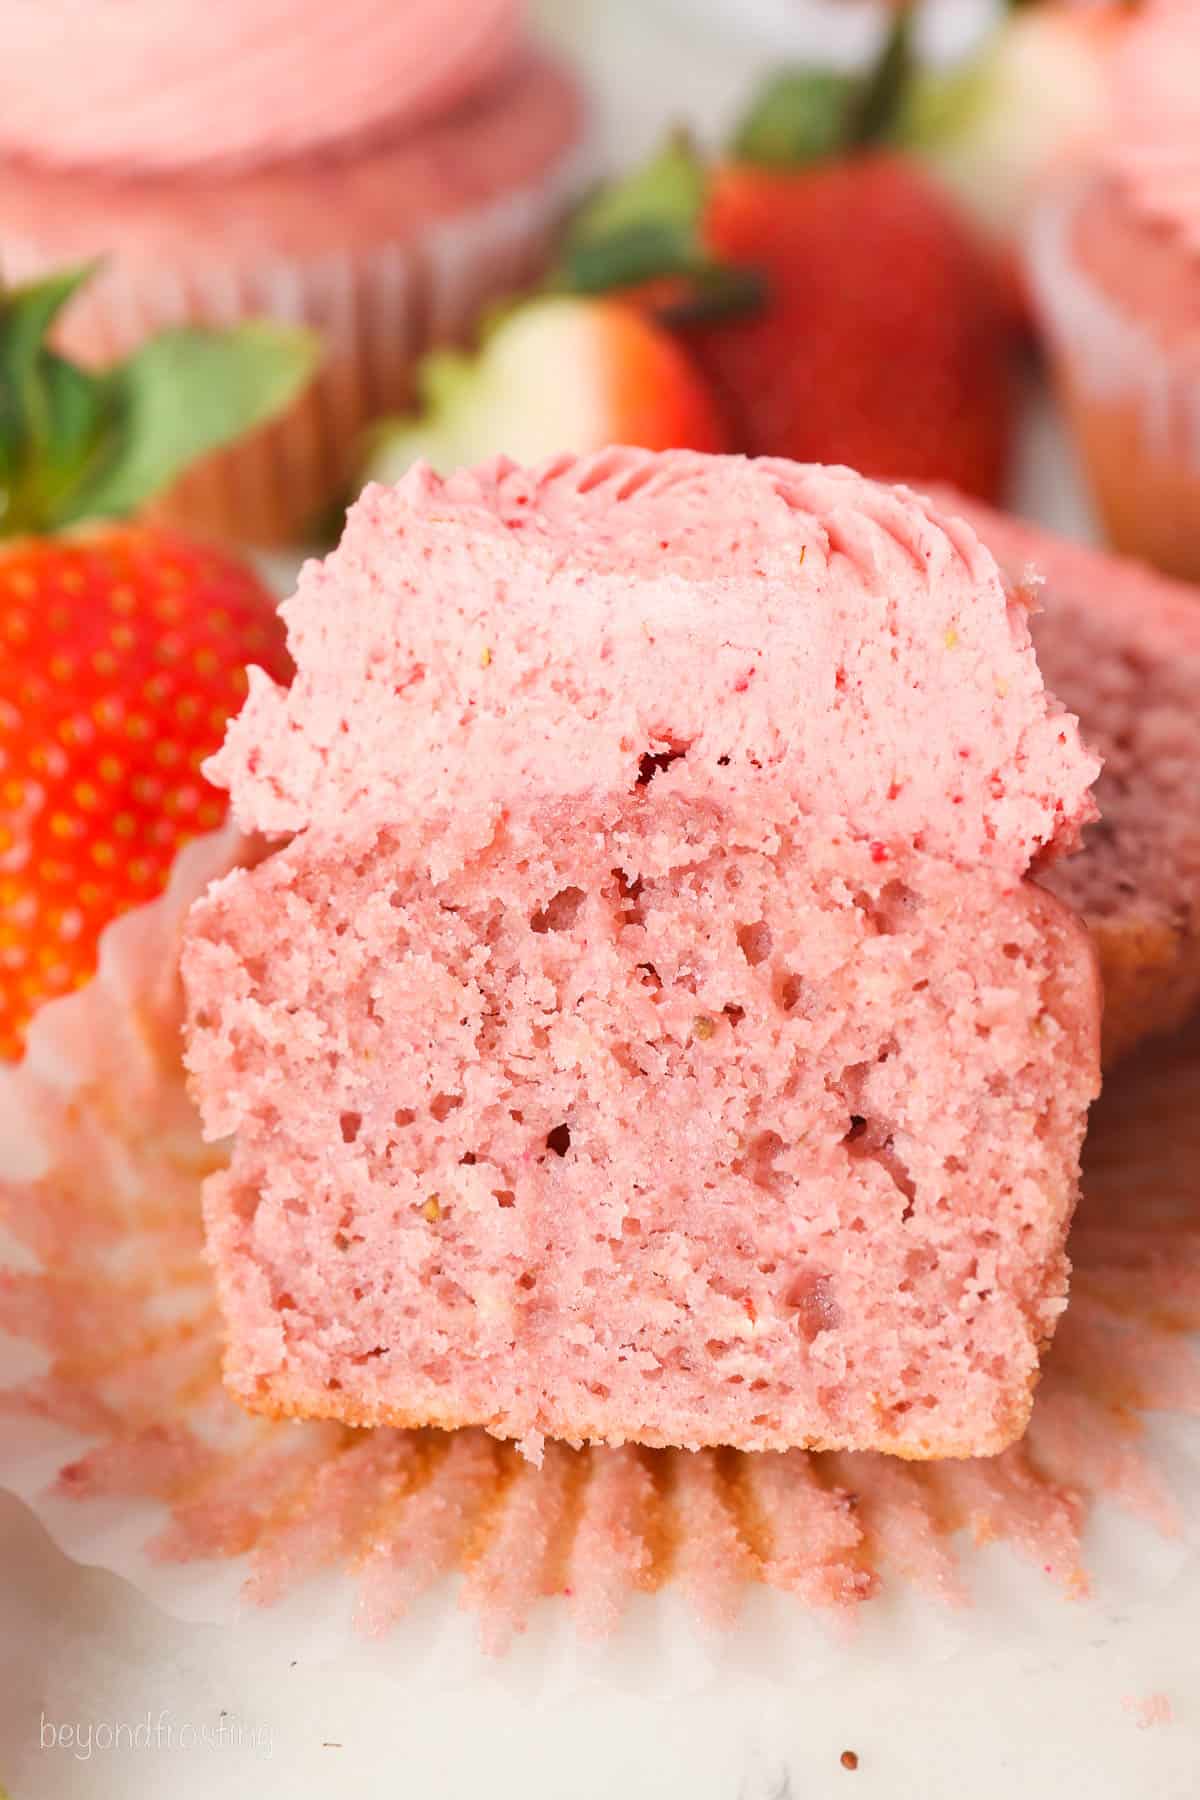 An unwrapped, frosted strawberry cupcake cut in half.